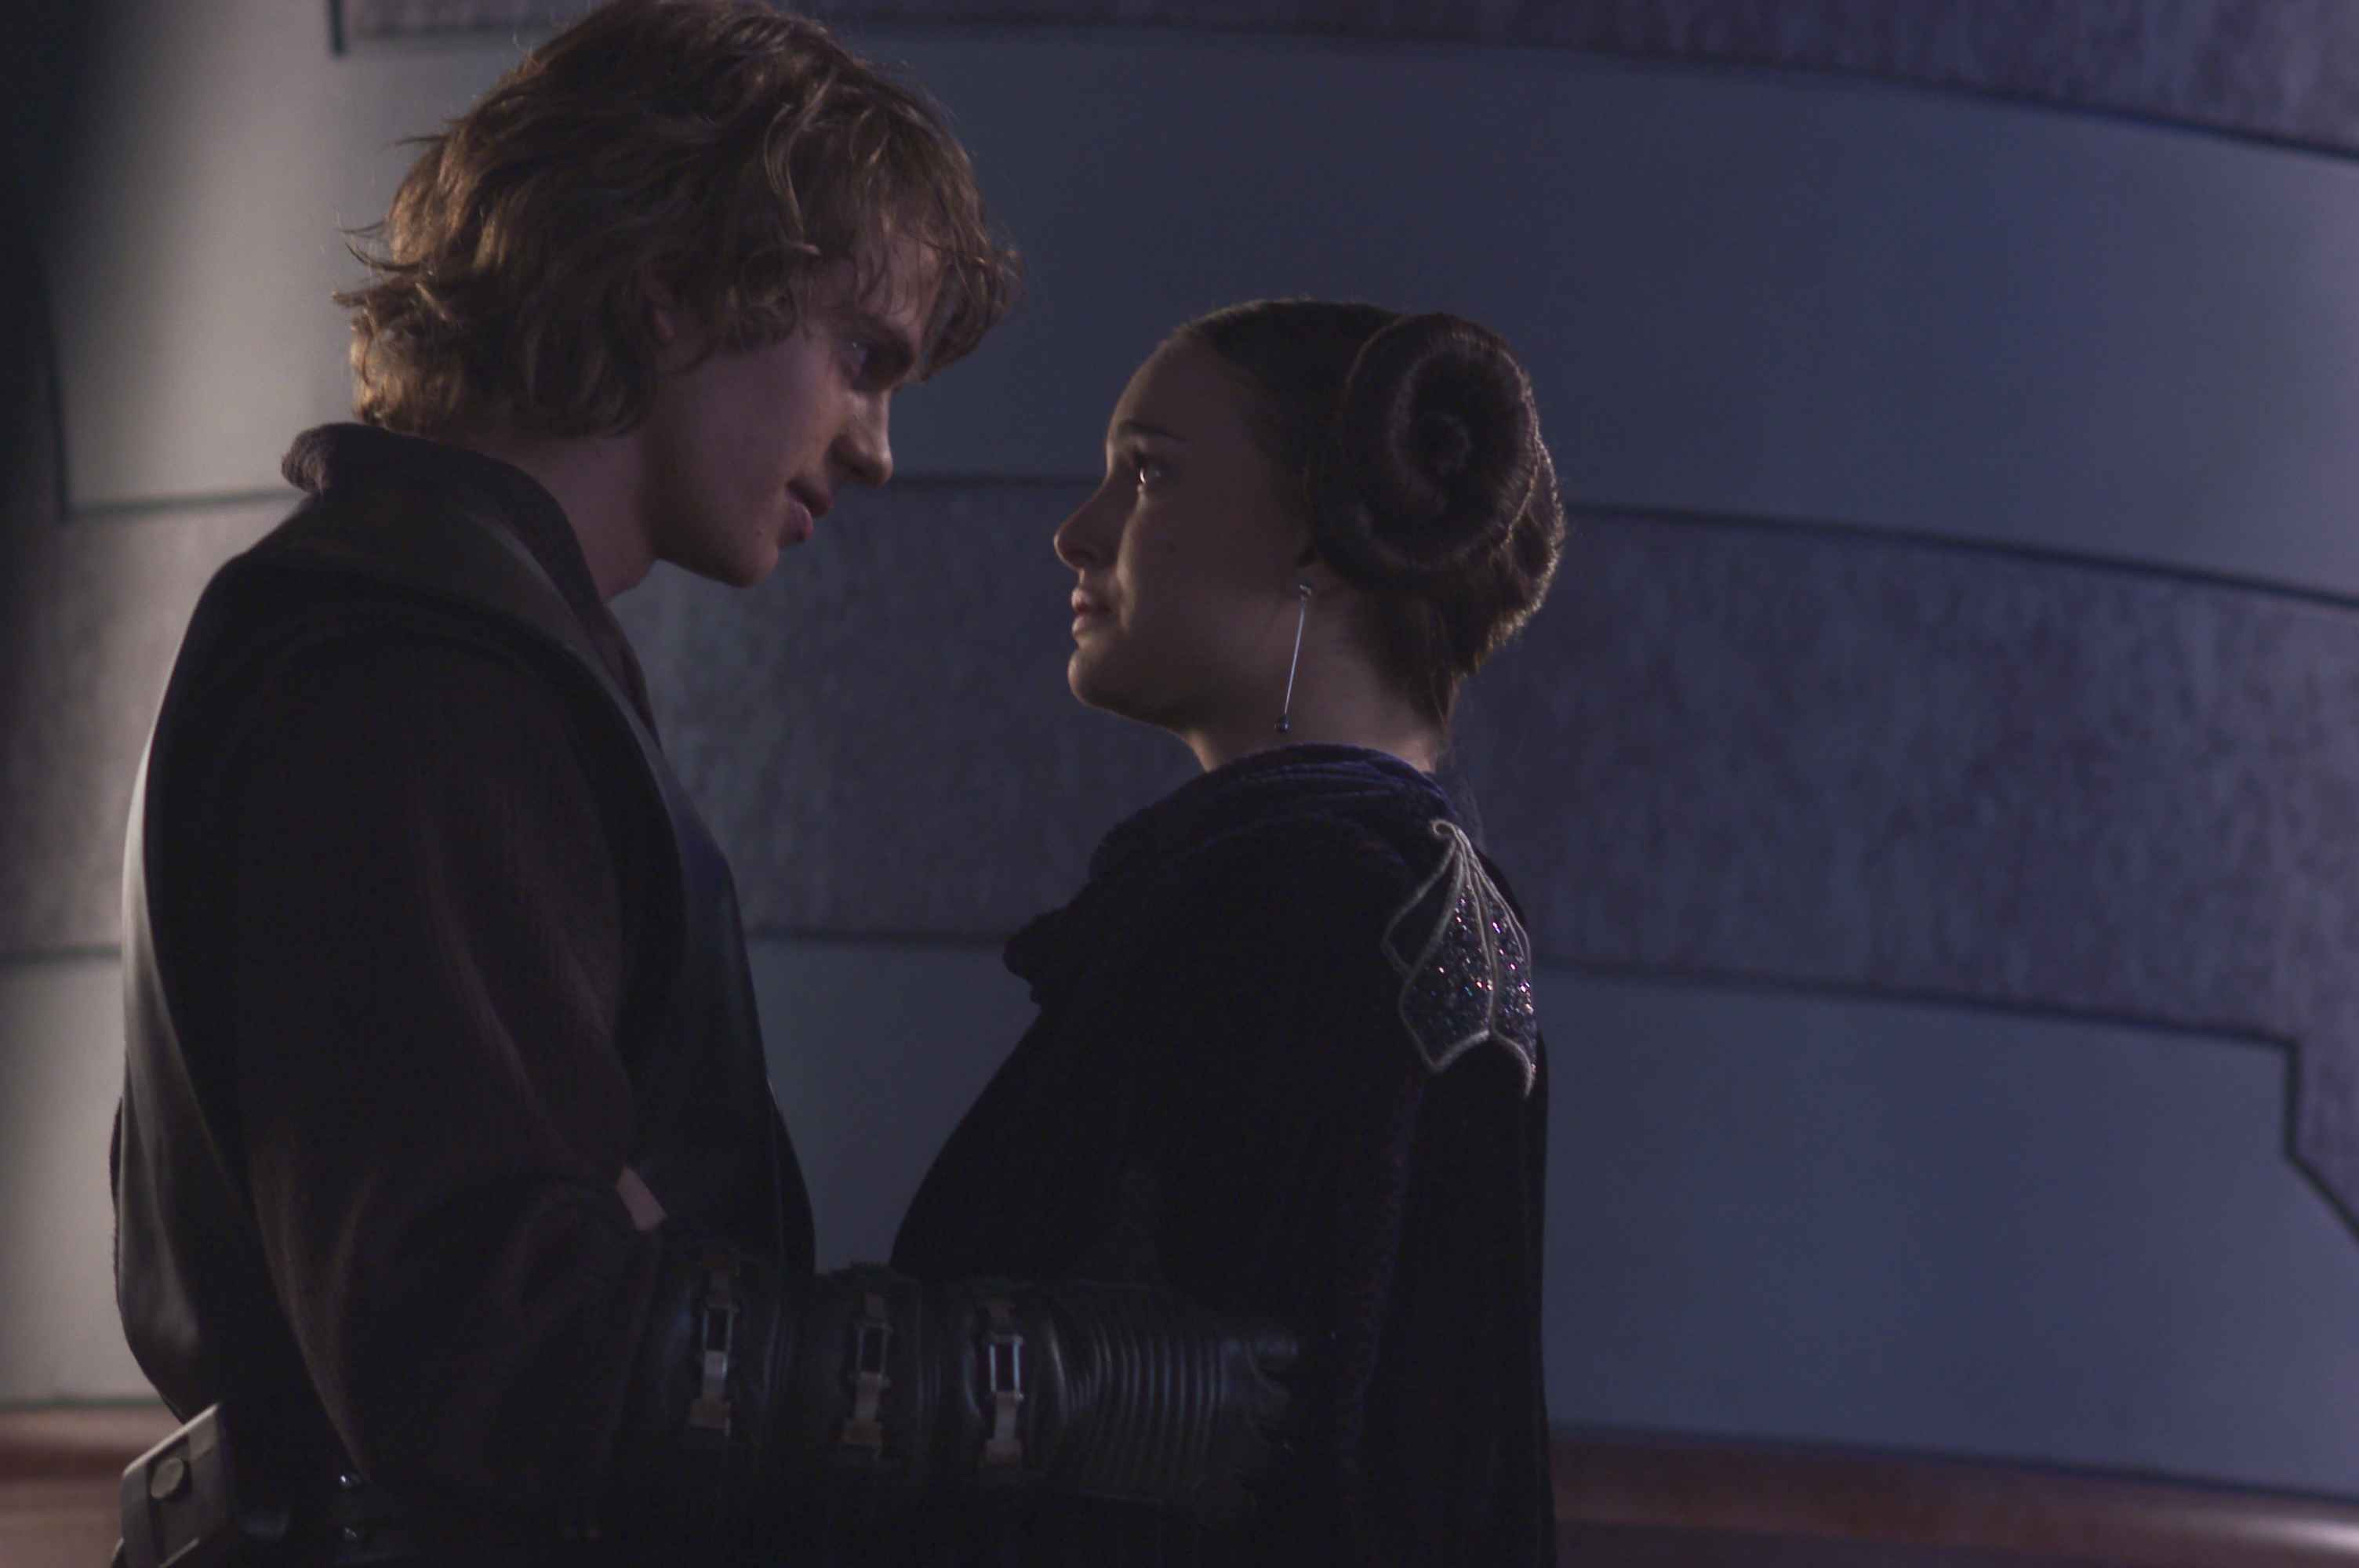 Hayden Christensen and Natalie Portman in their first scene together for Revenge of the Sith.